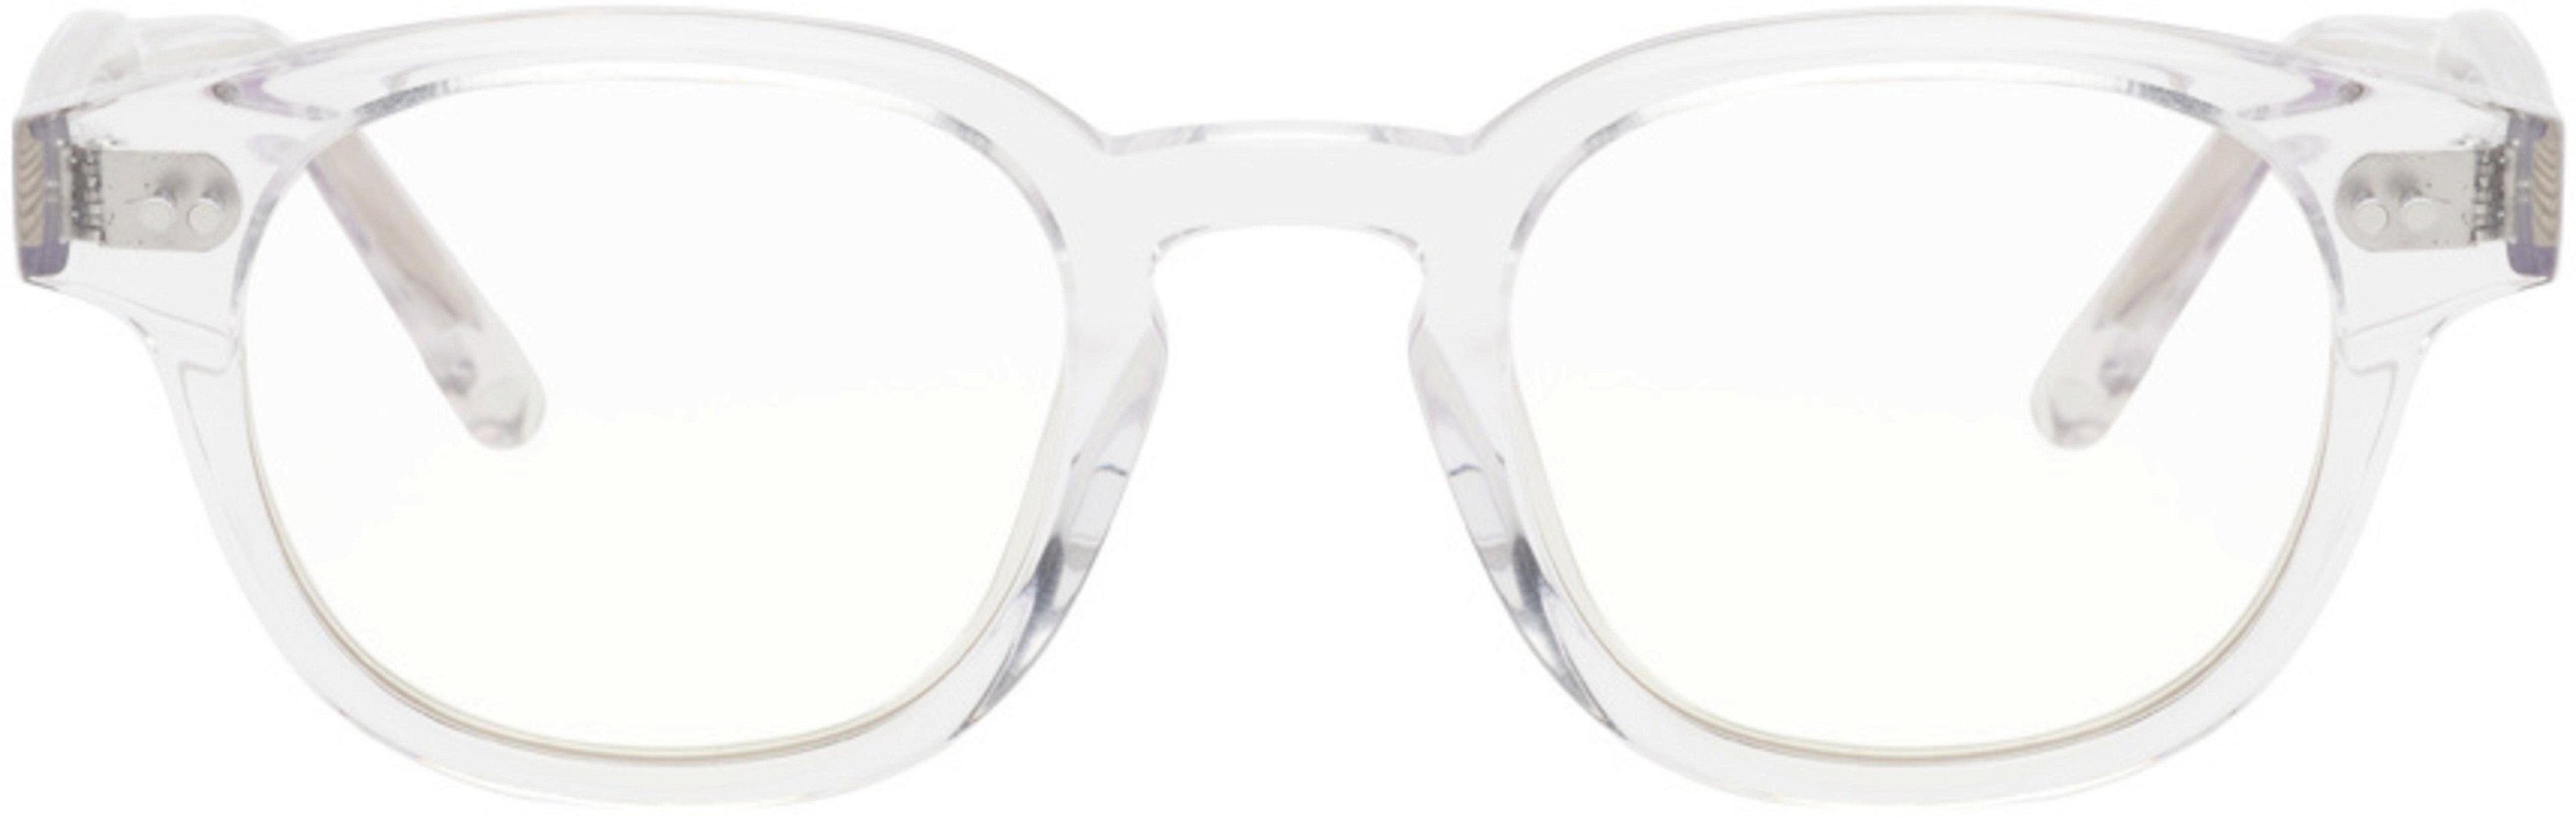 Transparent Core 01 Glasses by CHIMI